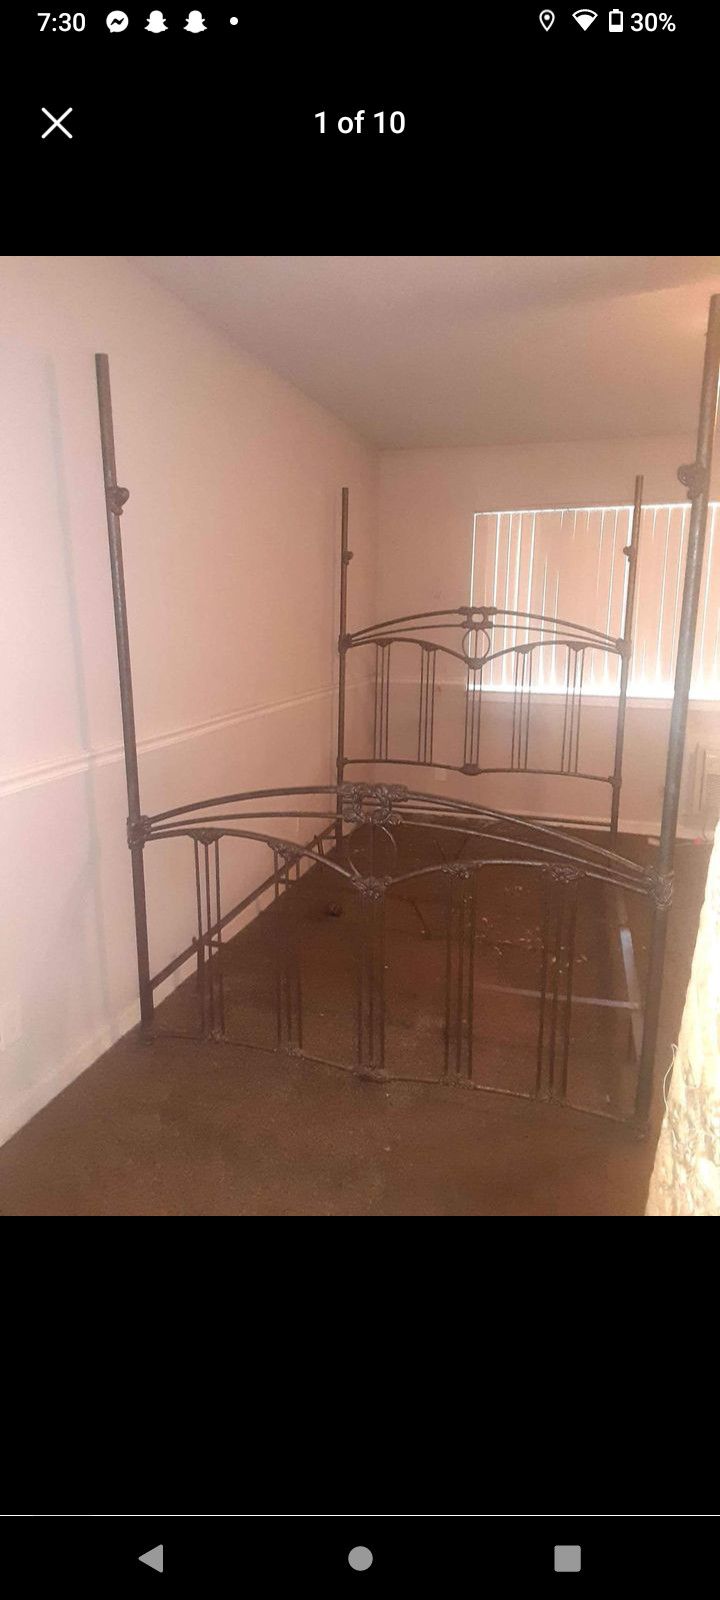 4 Post Canopy Bed 